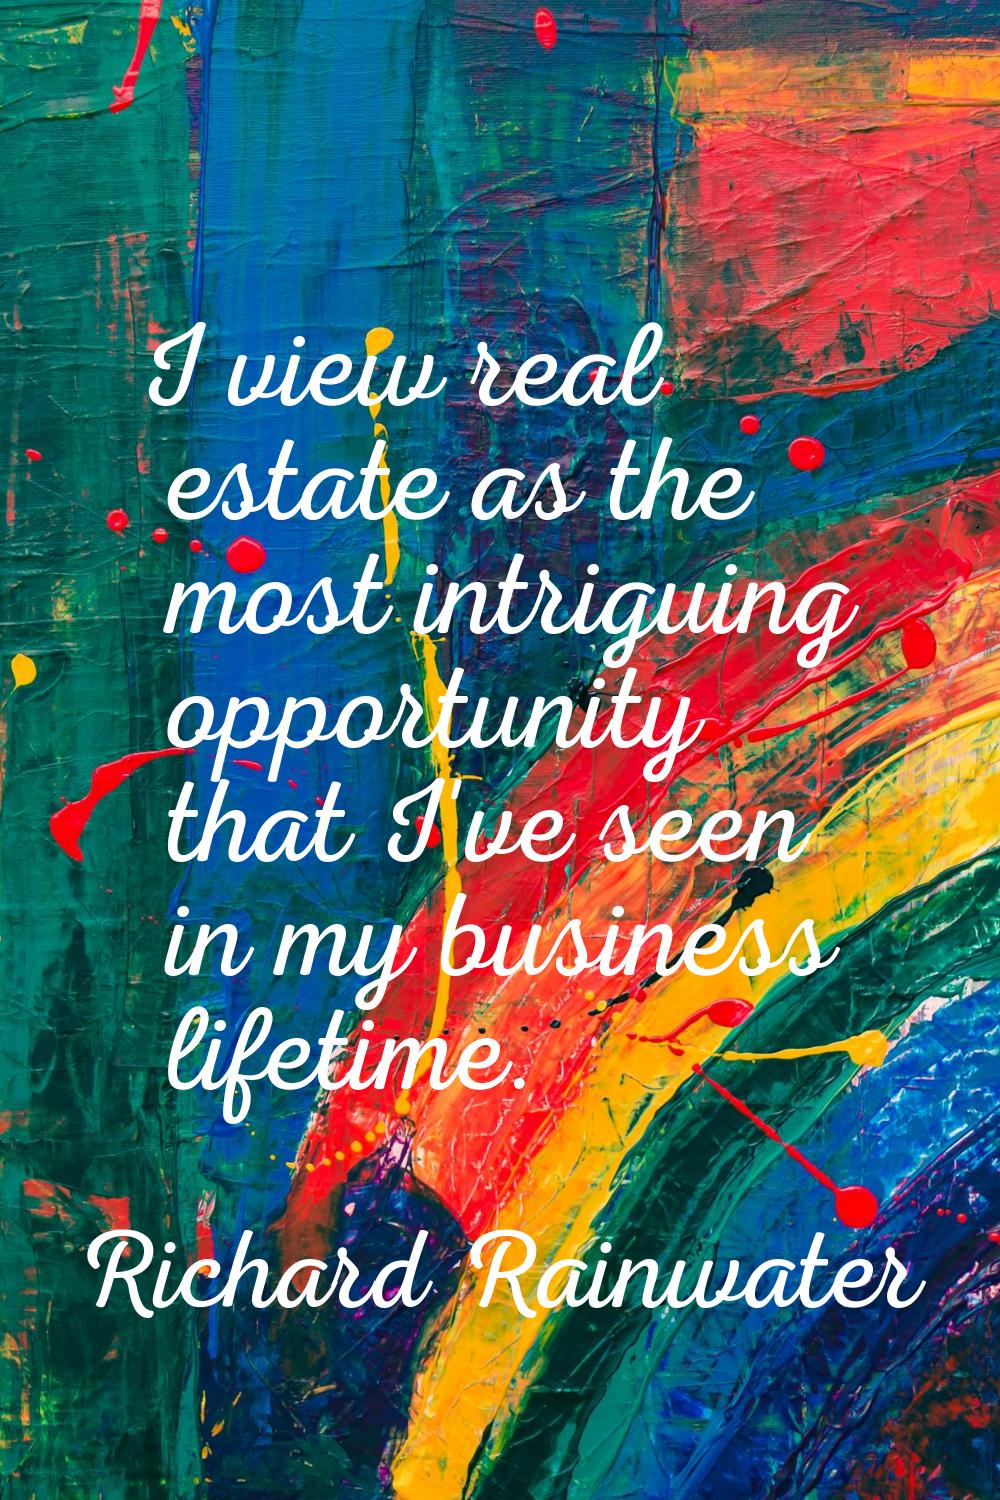 I view real estate as the most intriguing opportunity that I've seen in my business lifetime.